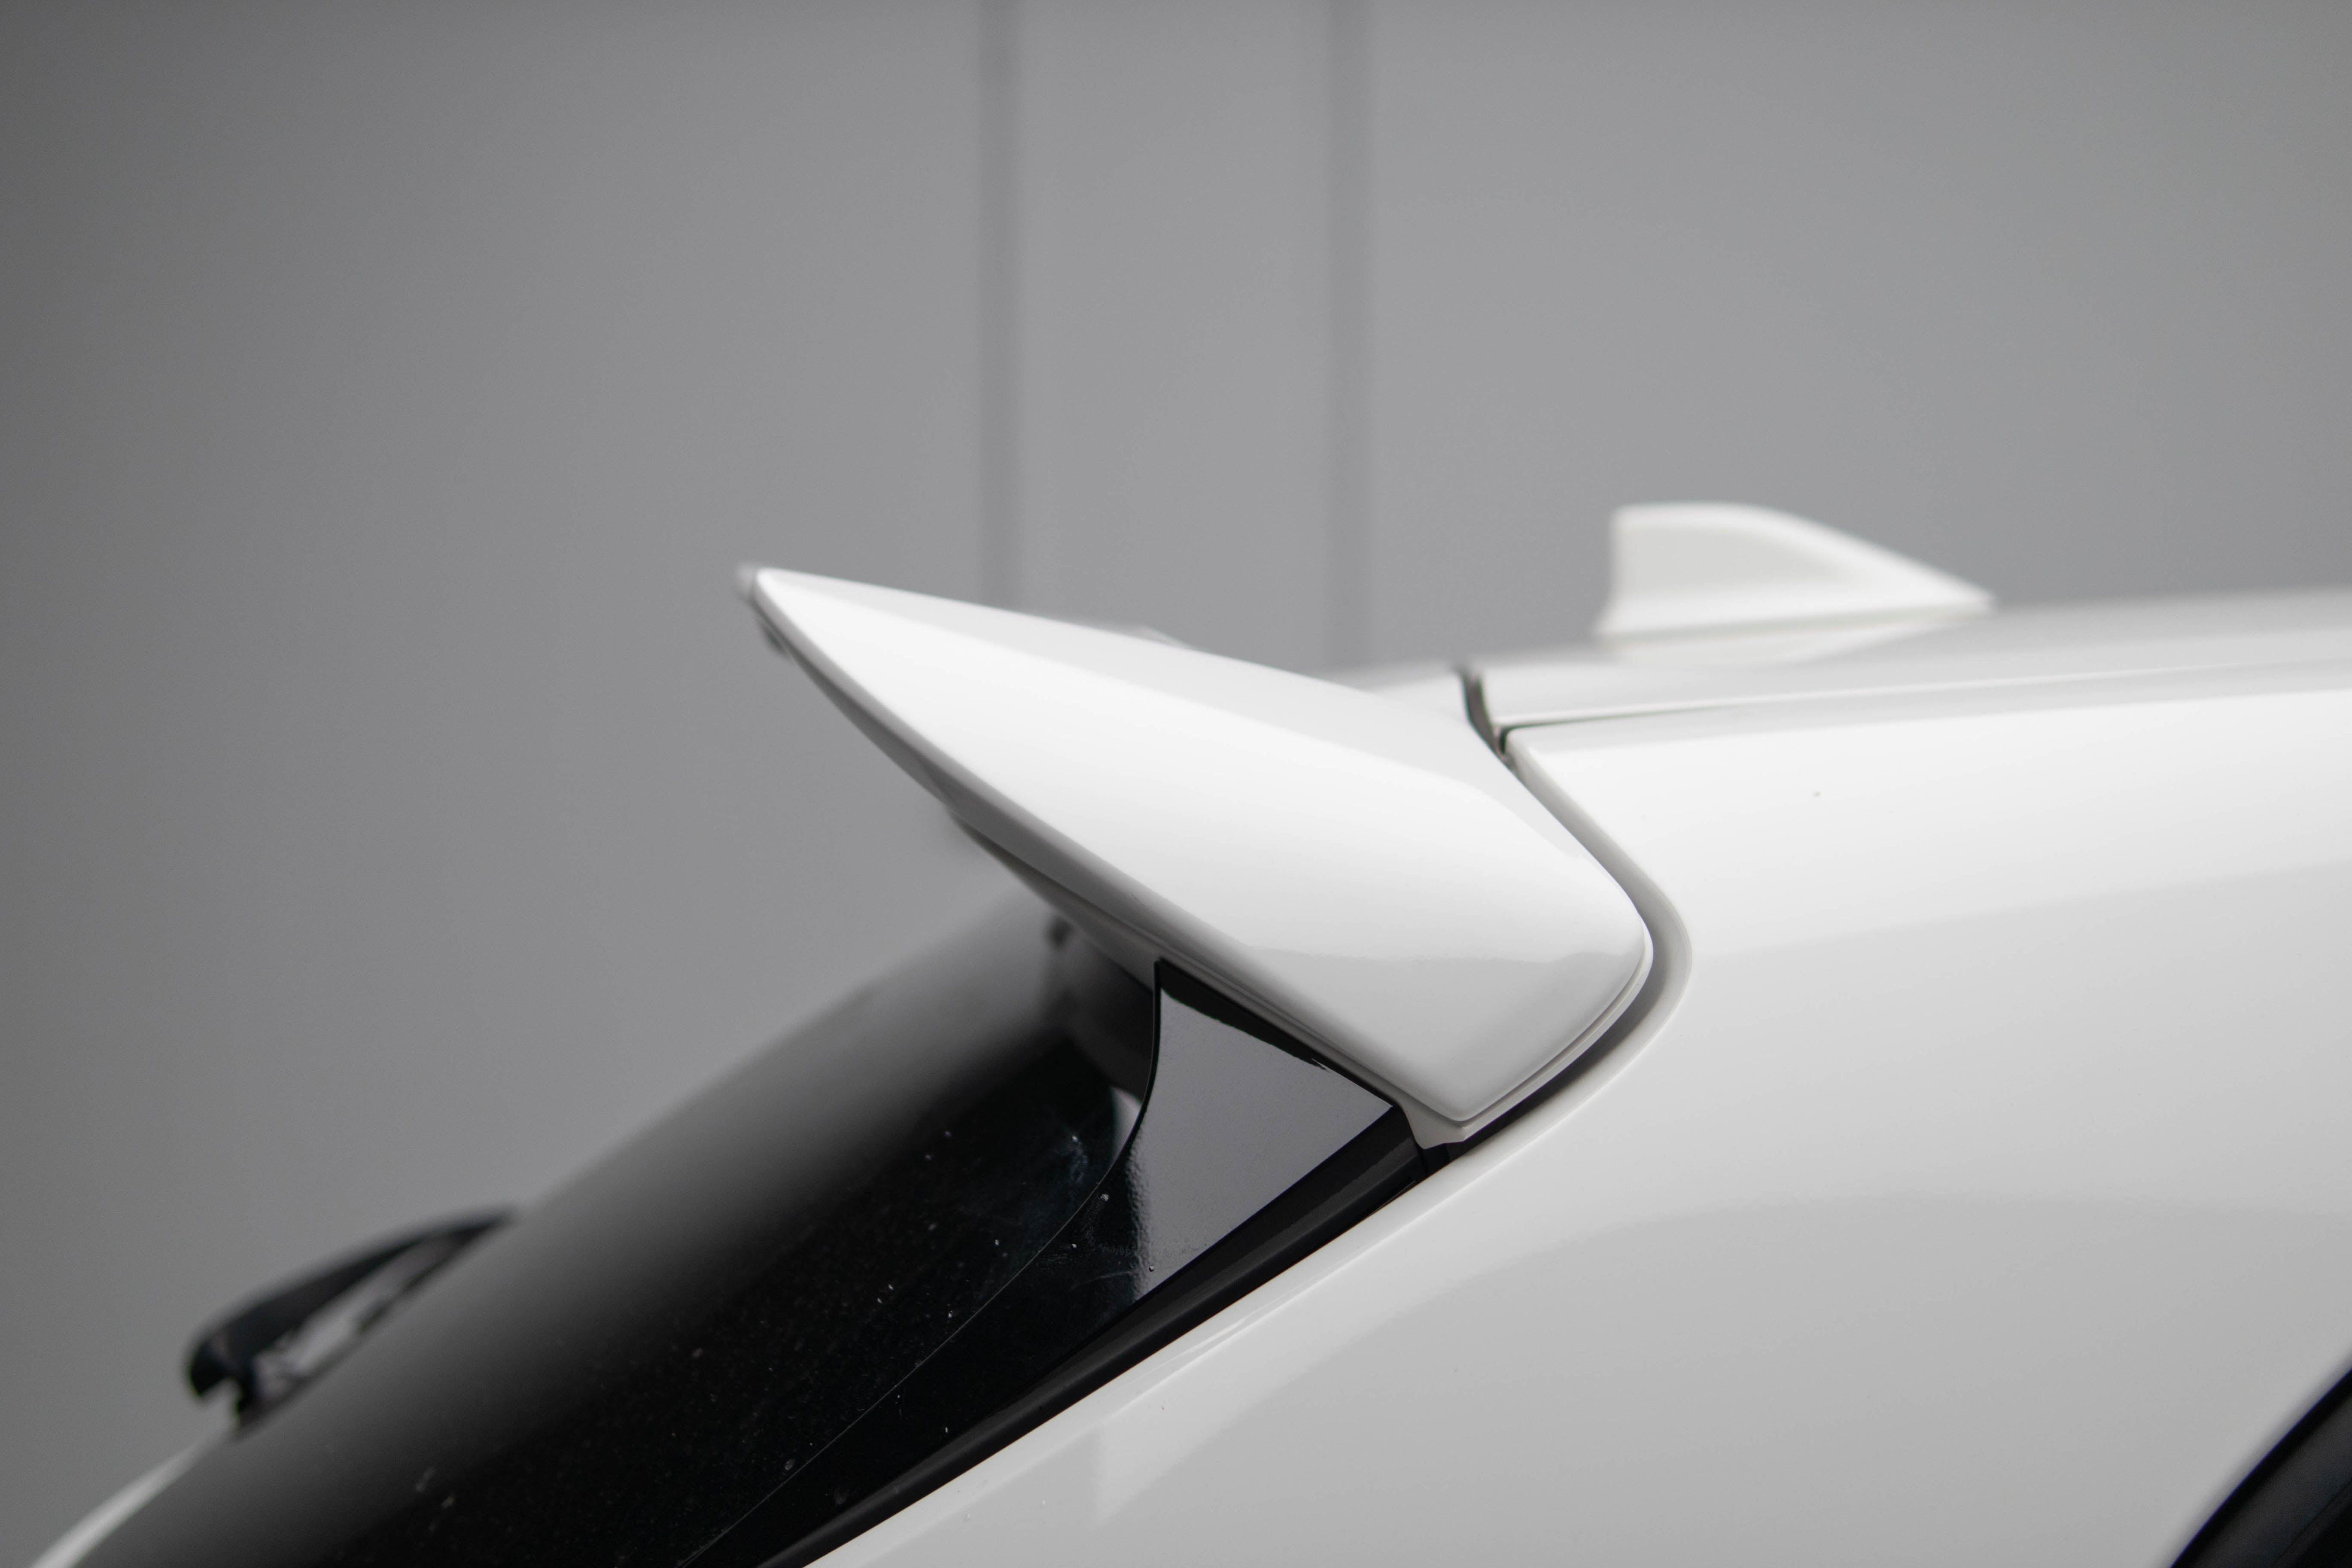 Zero Offset  OE V2 Style Roof Spoiler for 18+ Toyota Corolla (Hatch) - MODE Auto Concepts